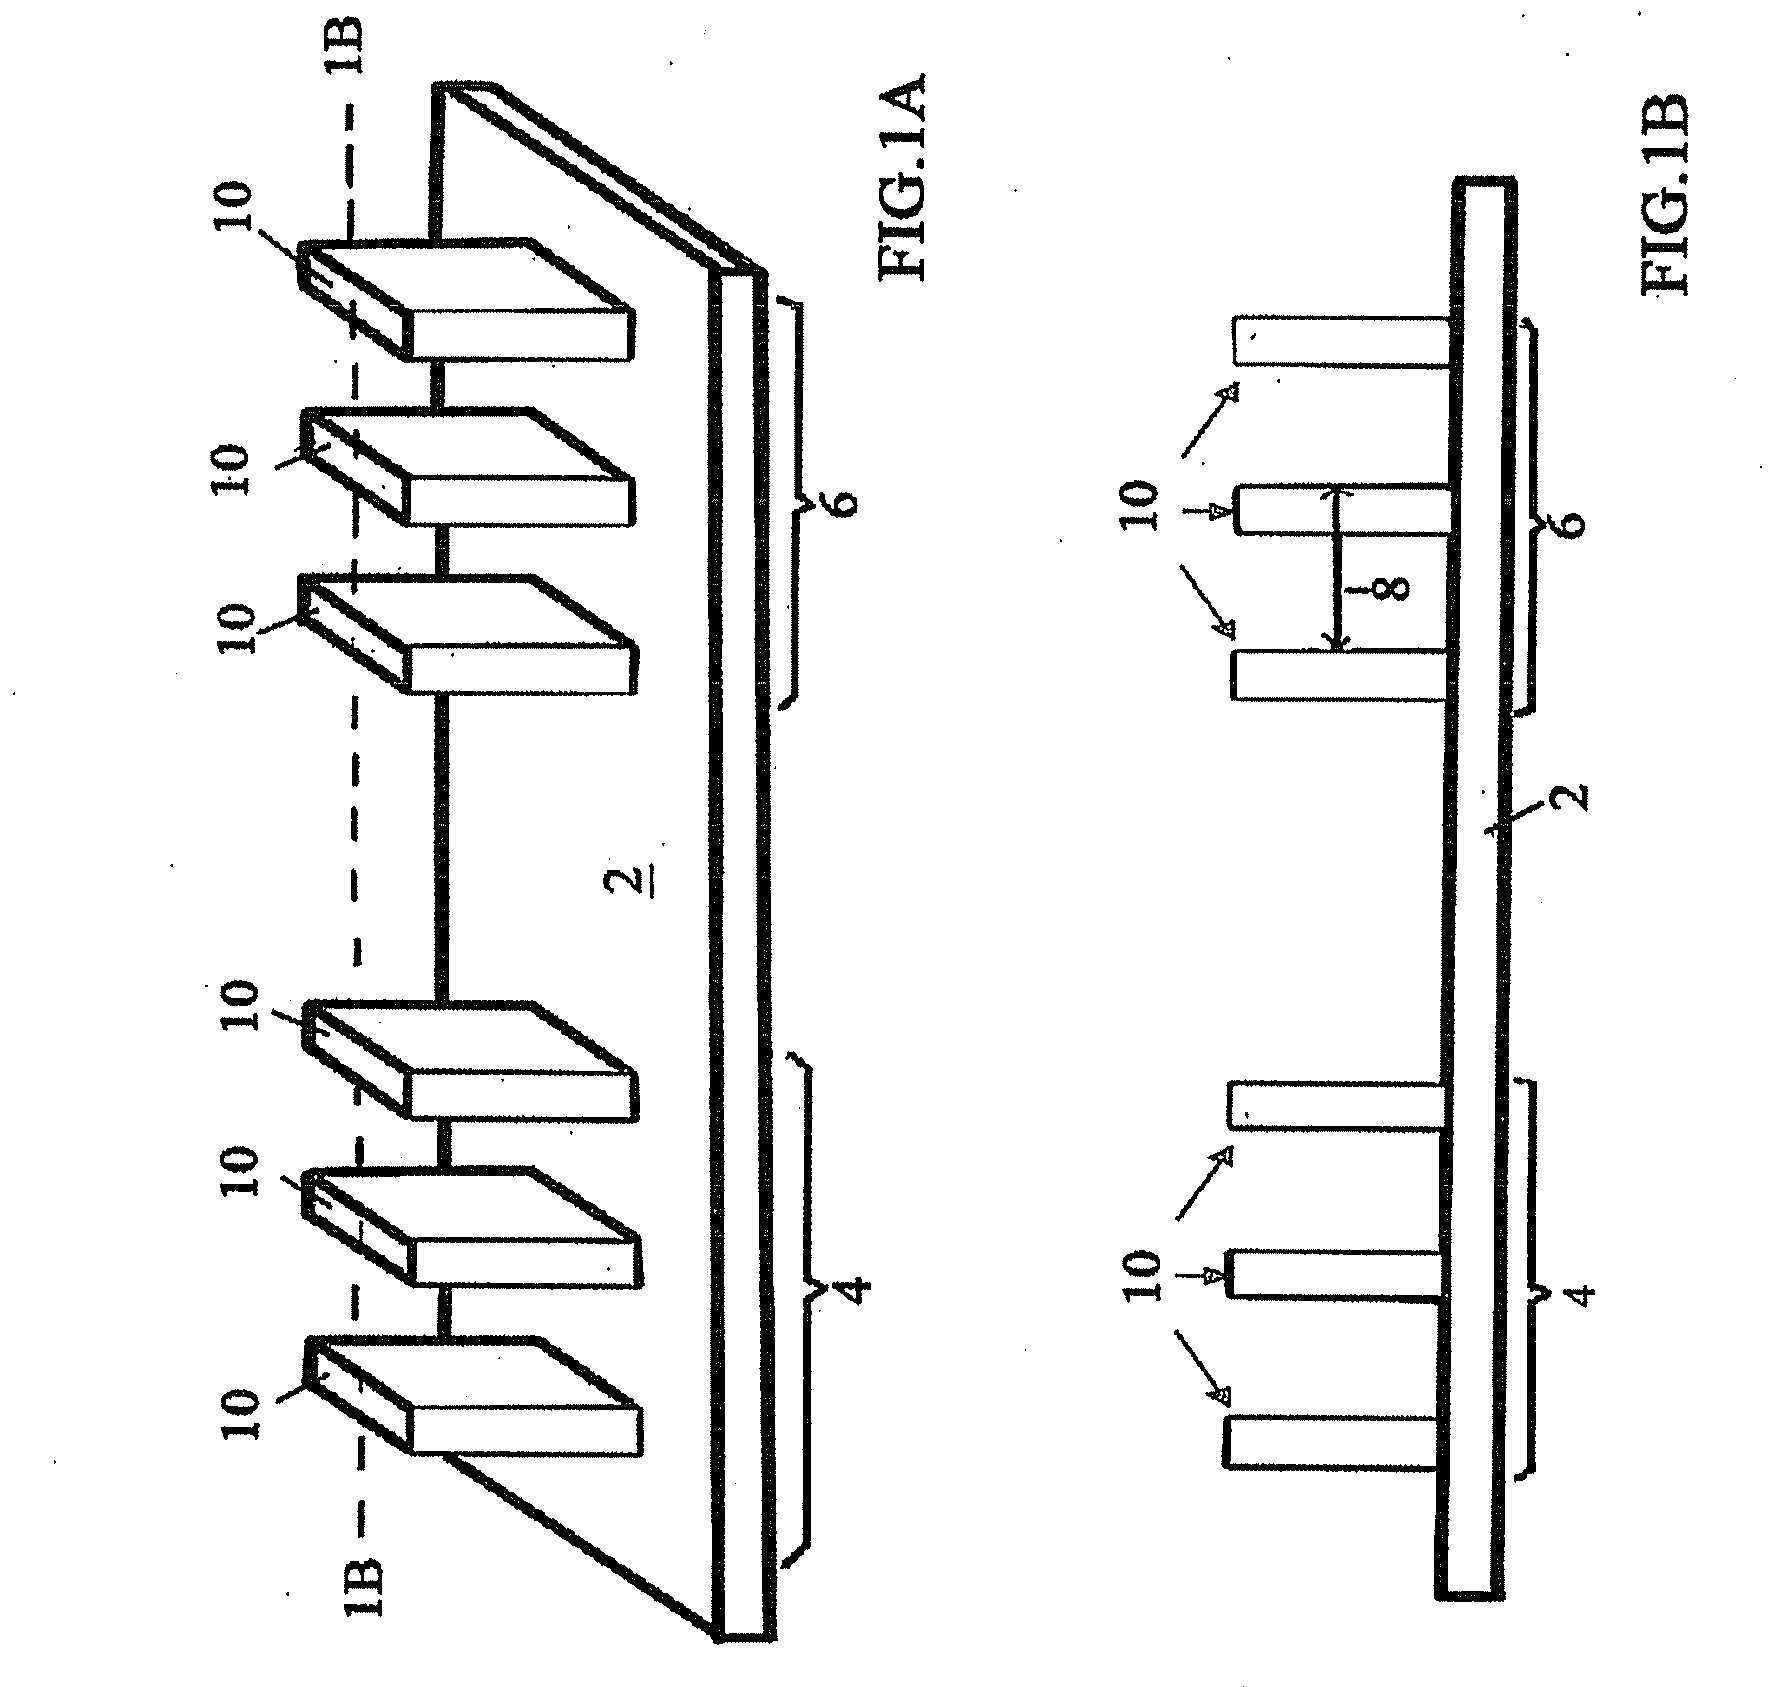 METAL GATE STRESS FILM FOR MOBILITY ENHANCEMENT IN FinFET DEVICE